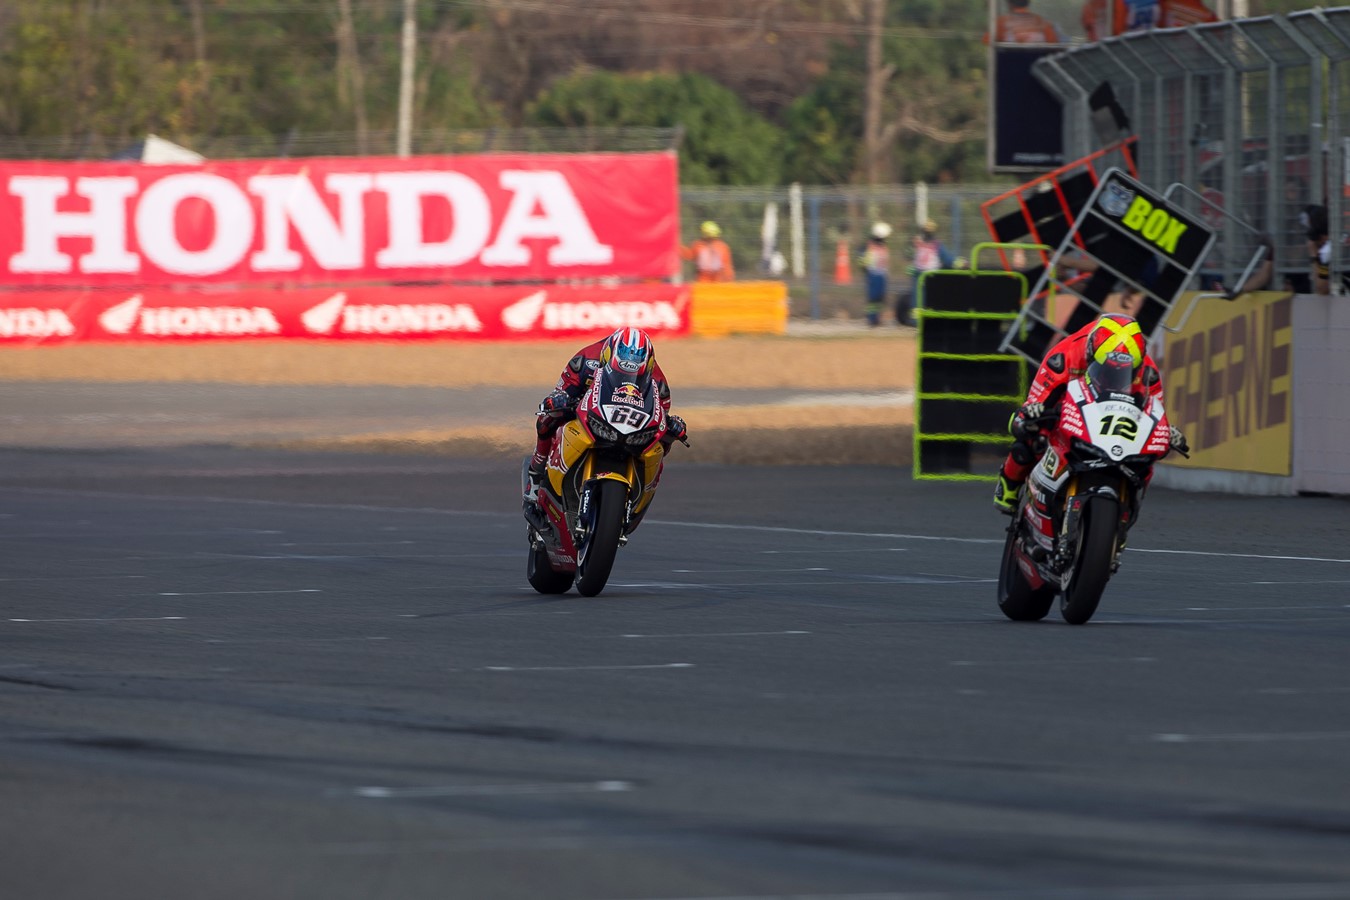 Hayden and Bradl make their way into top-10 in race one at Buriram